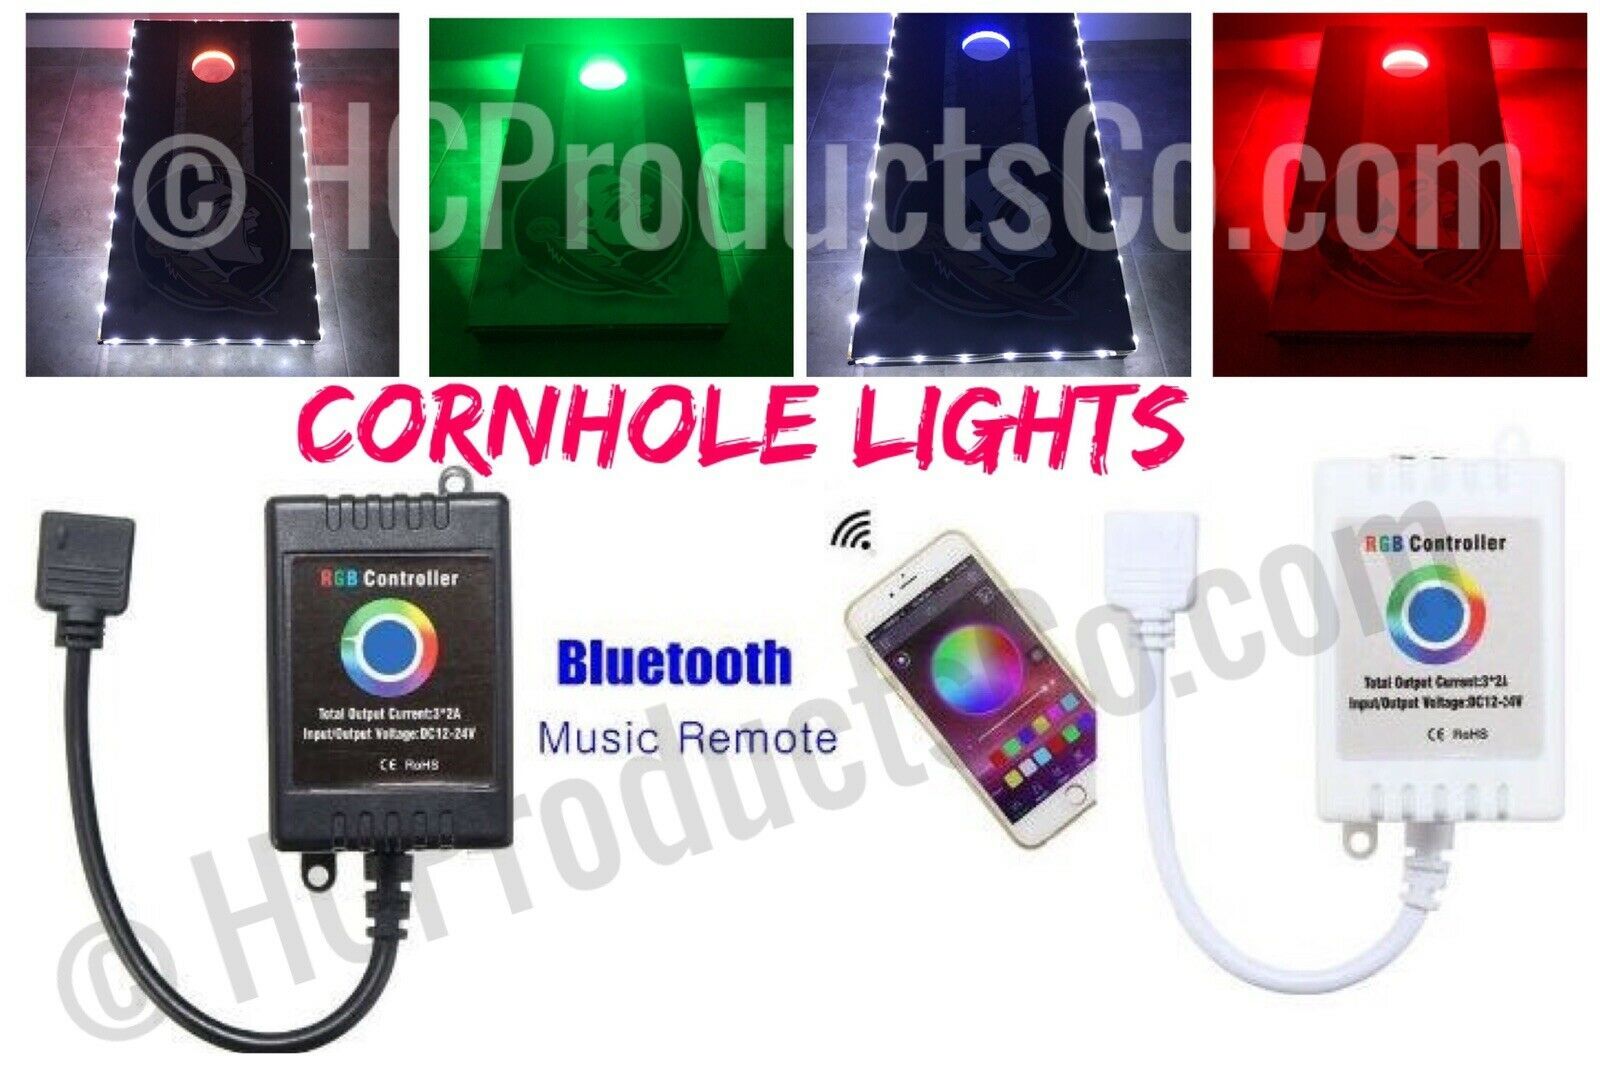 Primary image for Bluetooth Controlled Cornhole Lights with 16 Million Color and Motion Options